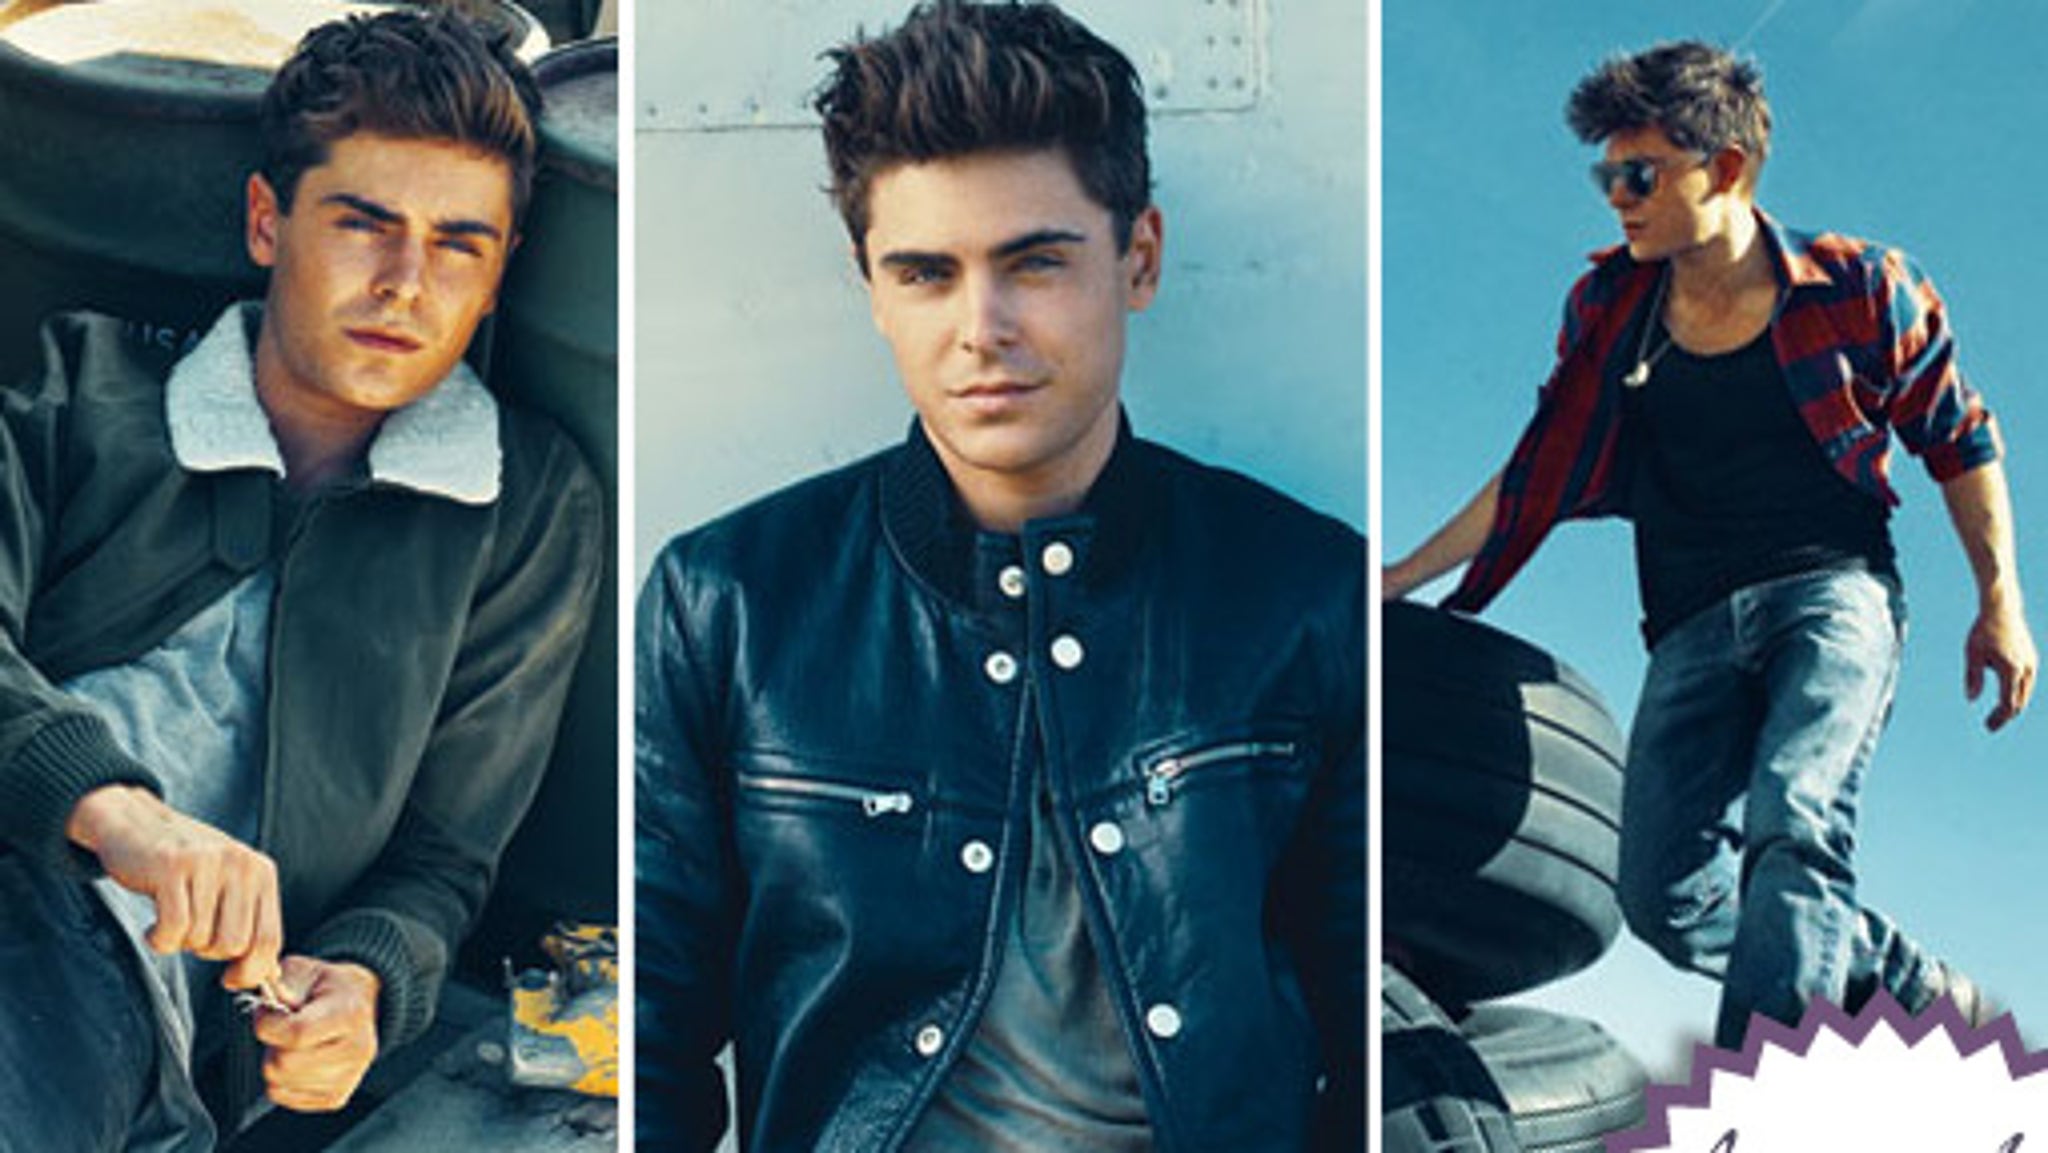 Zac Efron -- Details' September Issue Cover Boy